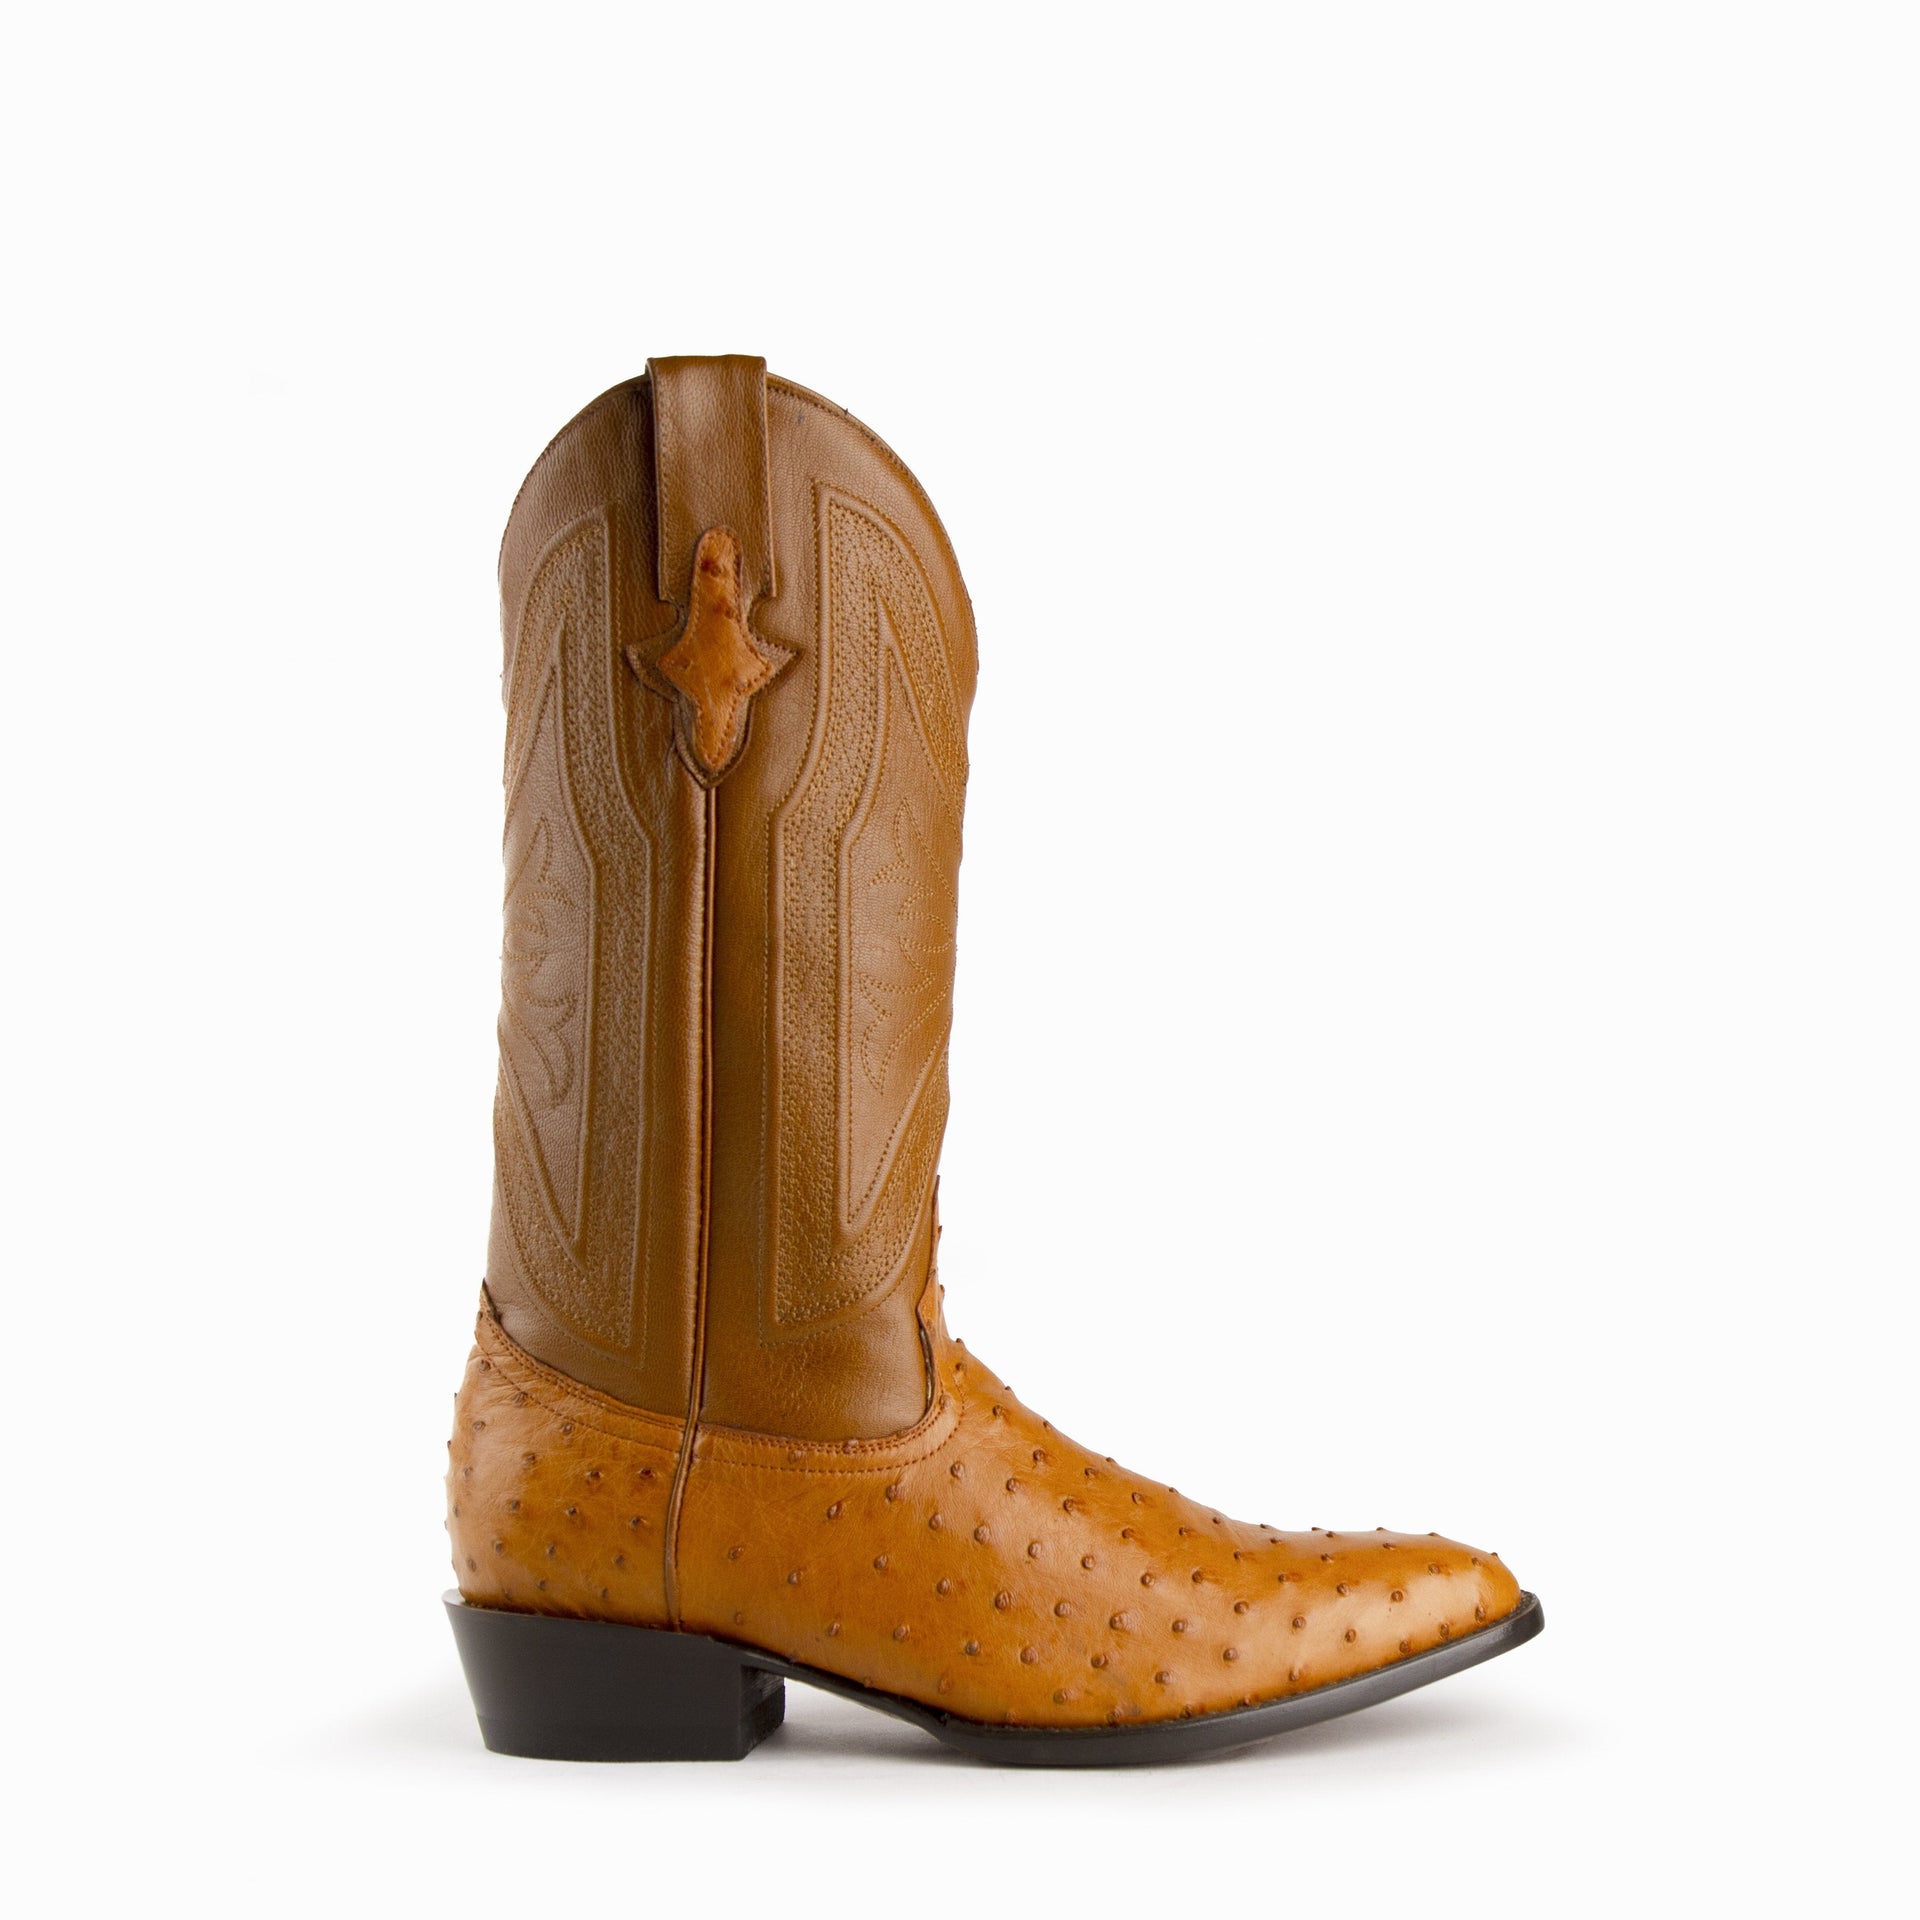 Men's Ferrini Colt Full Quill Ostrich Boots Handcrafted Cognac - yeehawcowboy